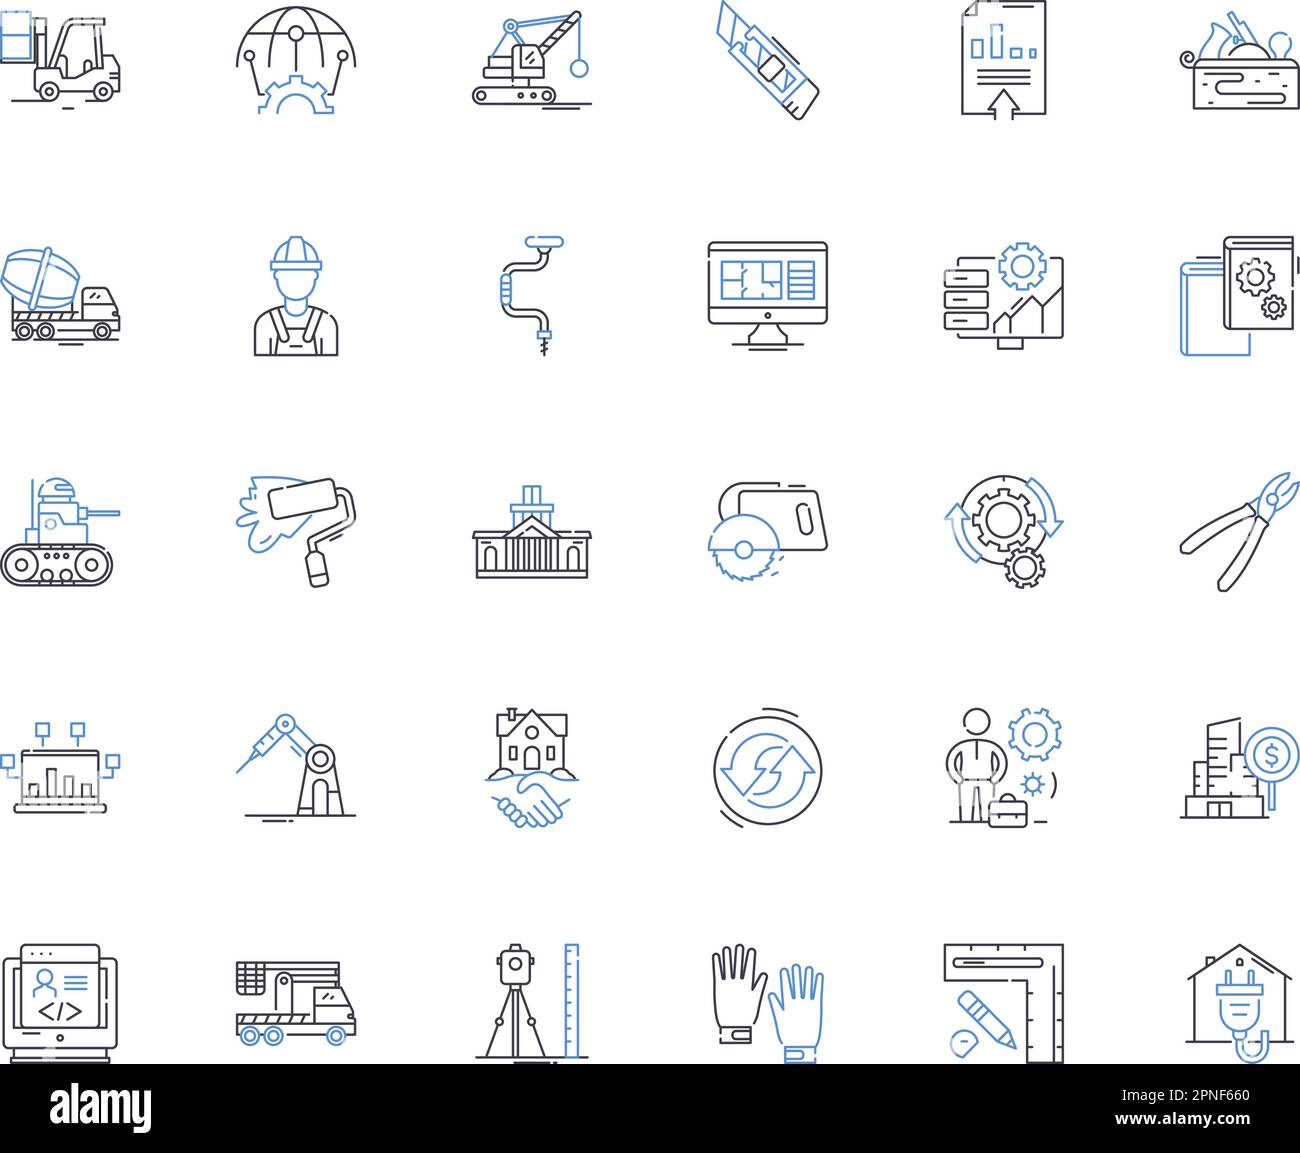 Fabricator line icons collection. Welding, Cutting, Fabrication, Metalwork, Machining, Engineering, Design vector and linear illustration Stock Vector